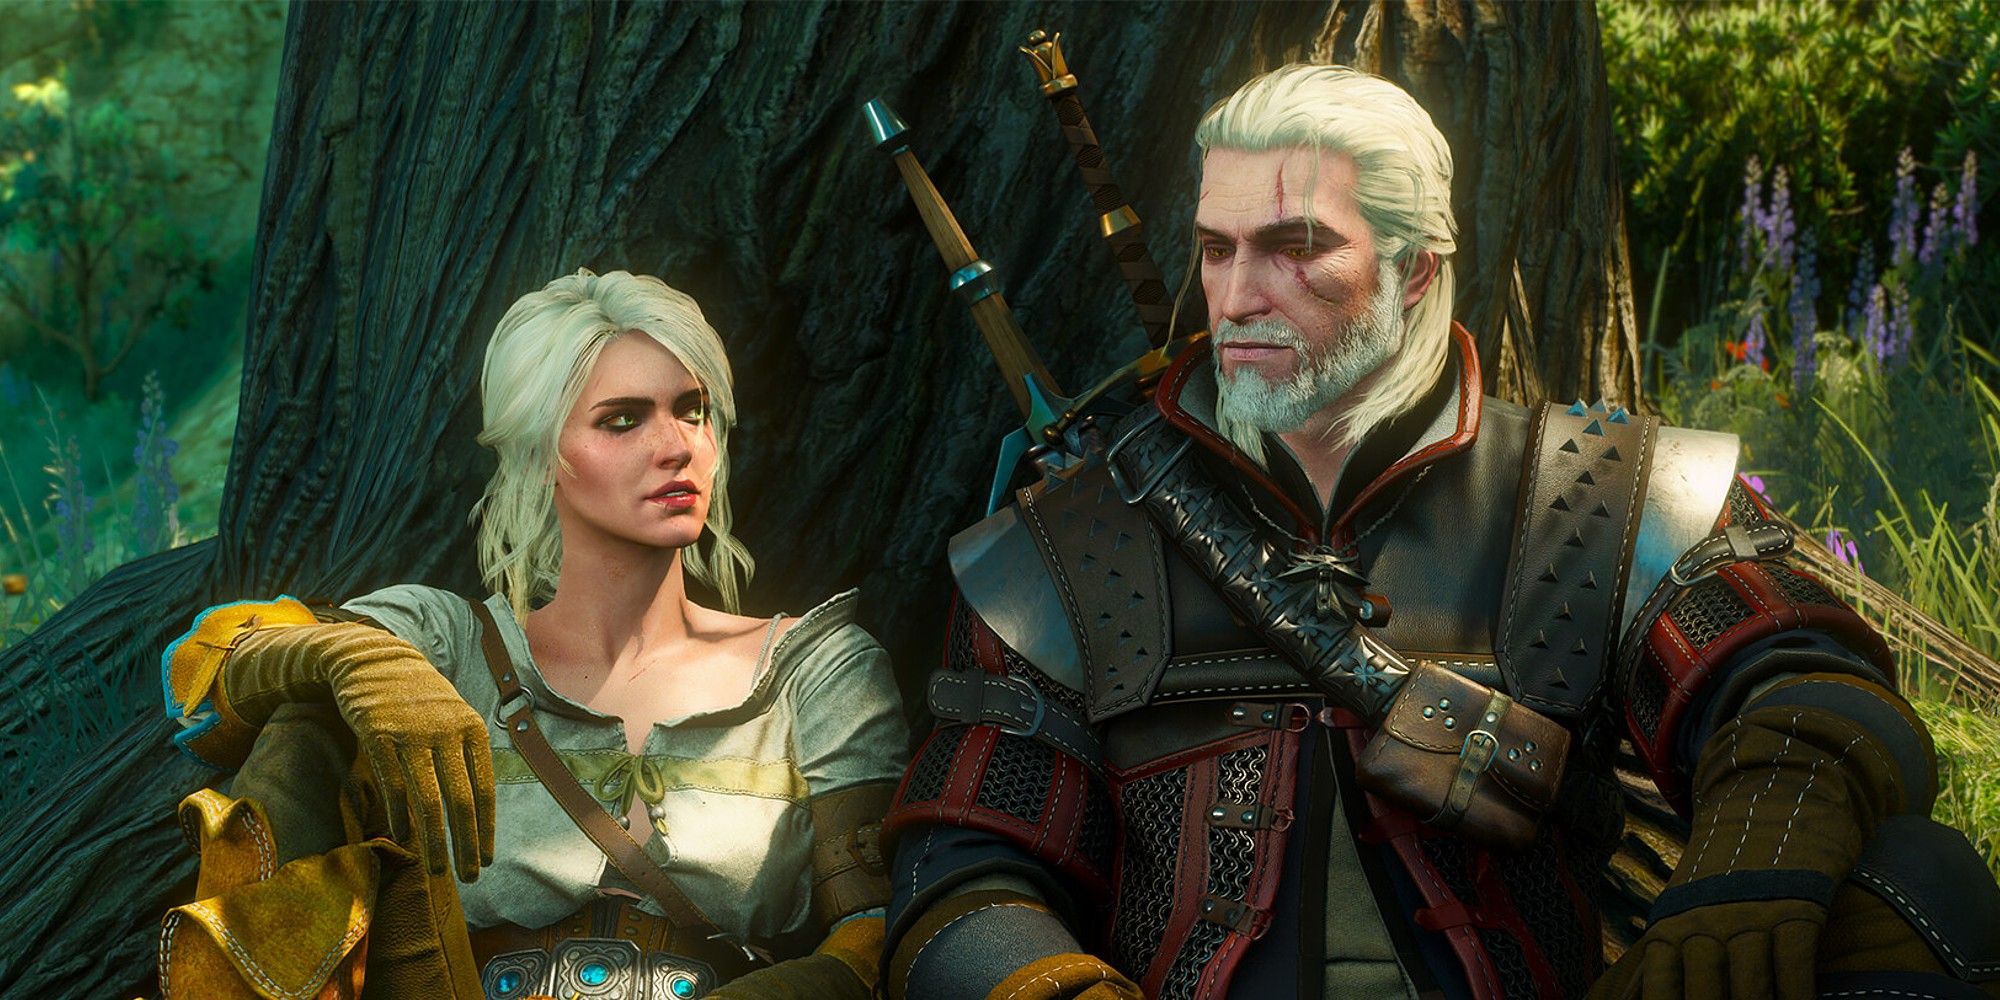 Fan-Made Witcher 4 Gear Screen Imagines Ciri As The Protagonist